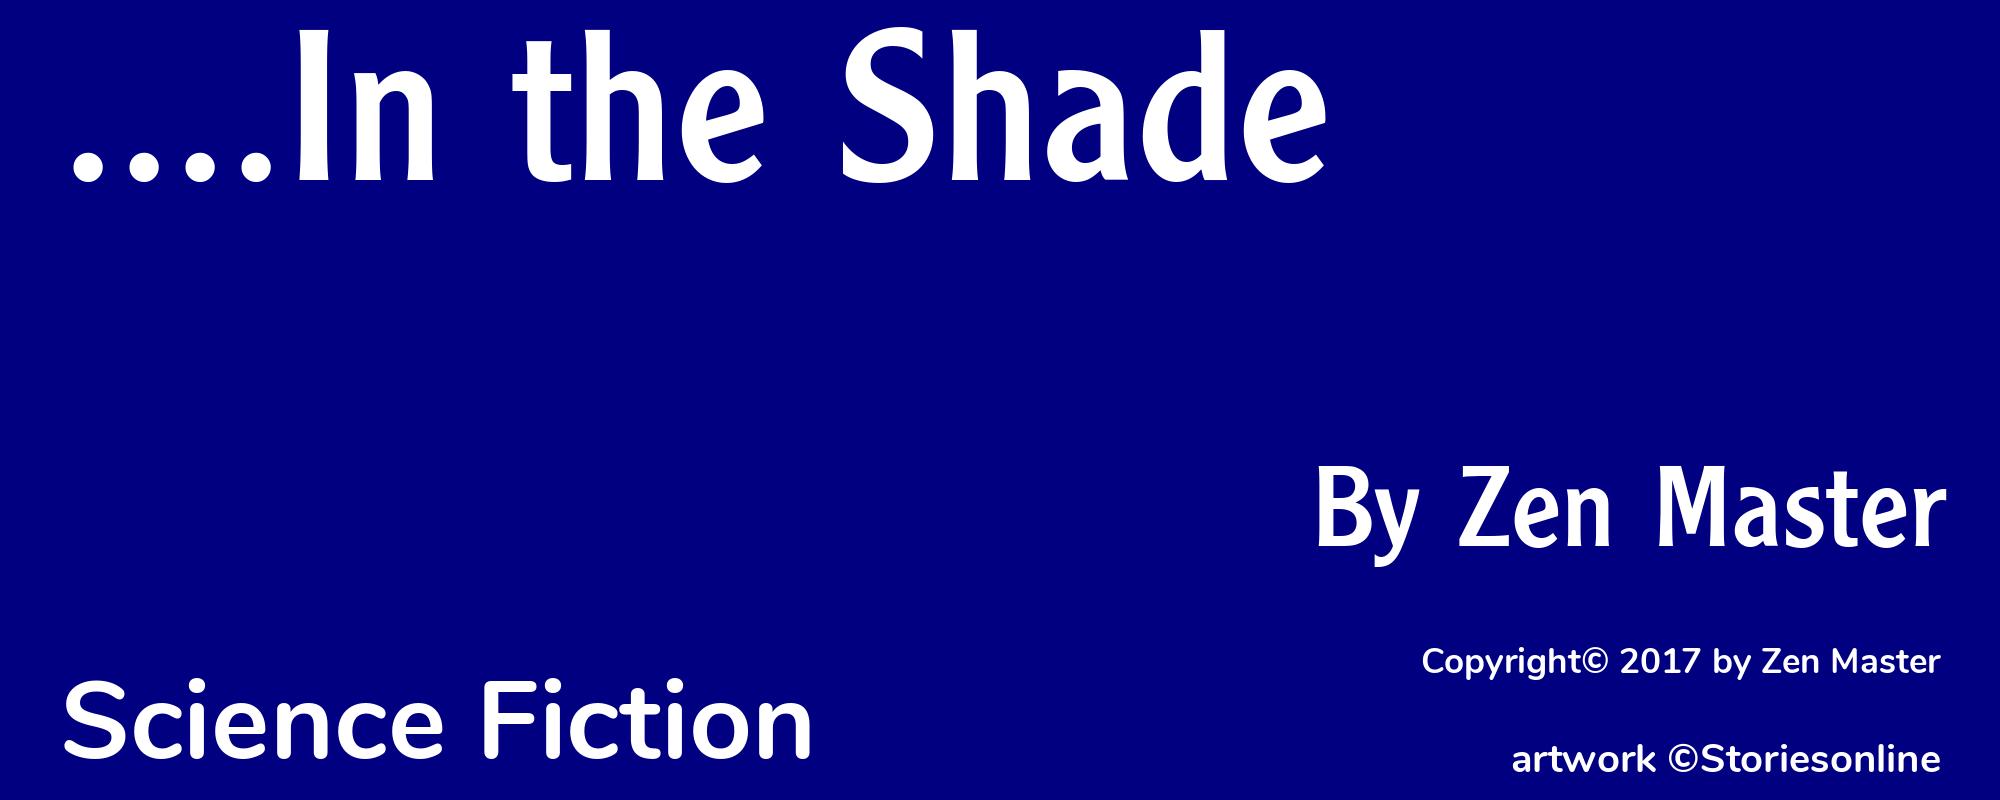 ....In the Shade - Cover